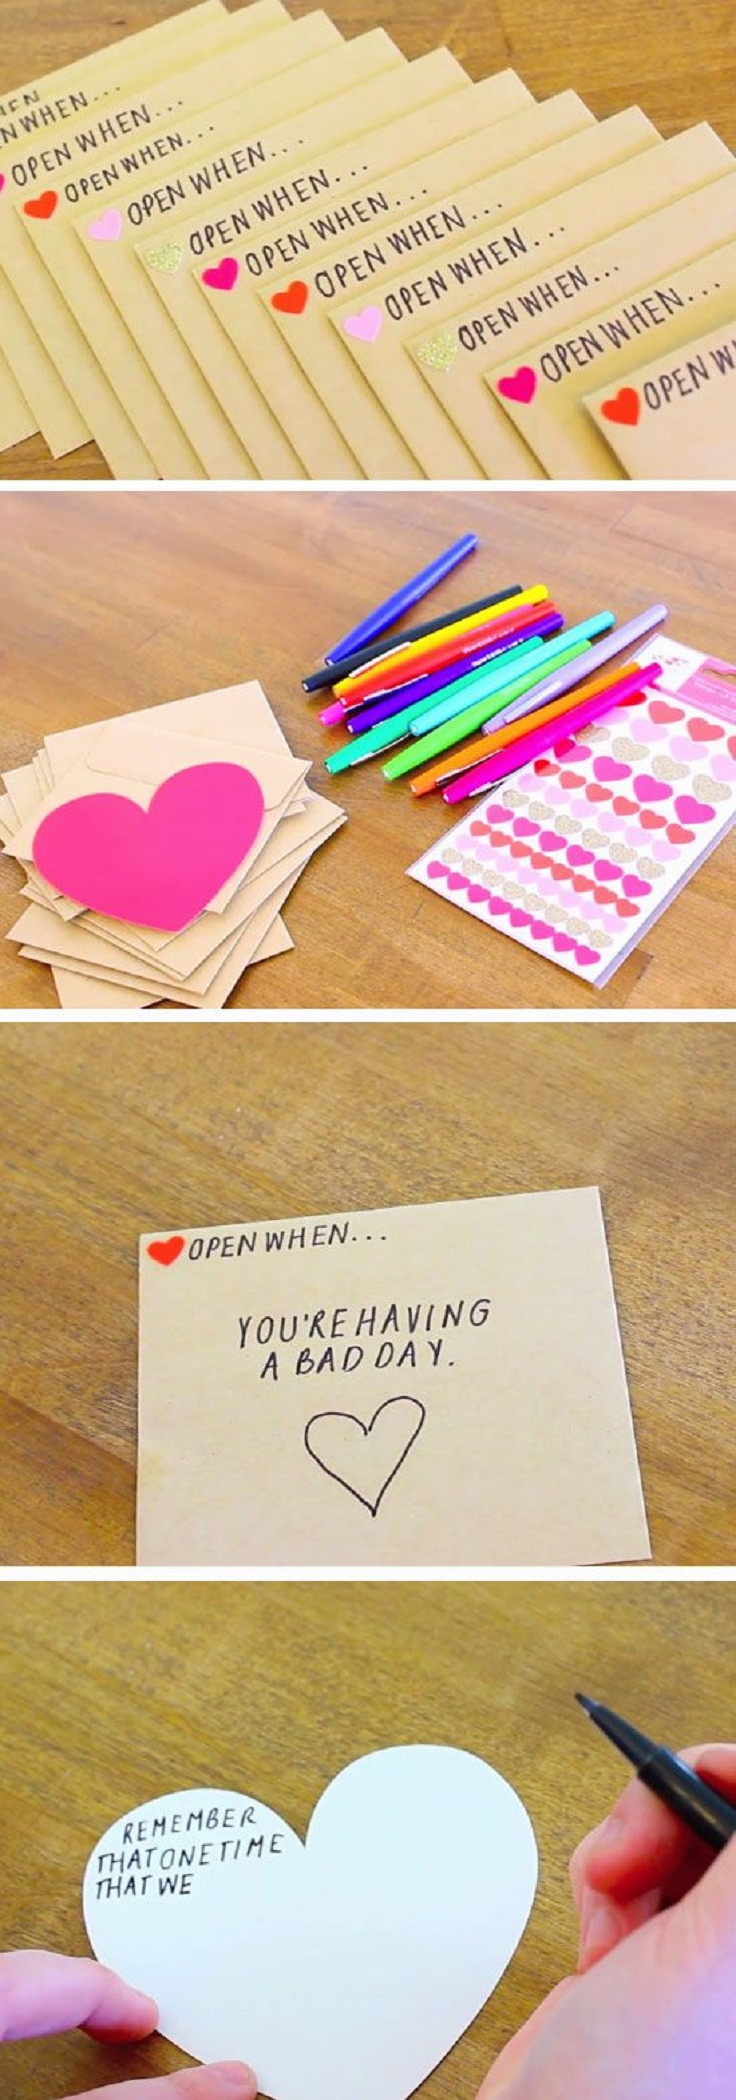 Homemade Gift Ideas For Boyfriend
 11 Creative Meaningful and Cheap DIY Gifts for Friends